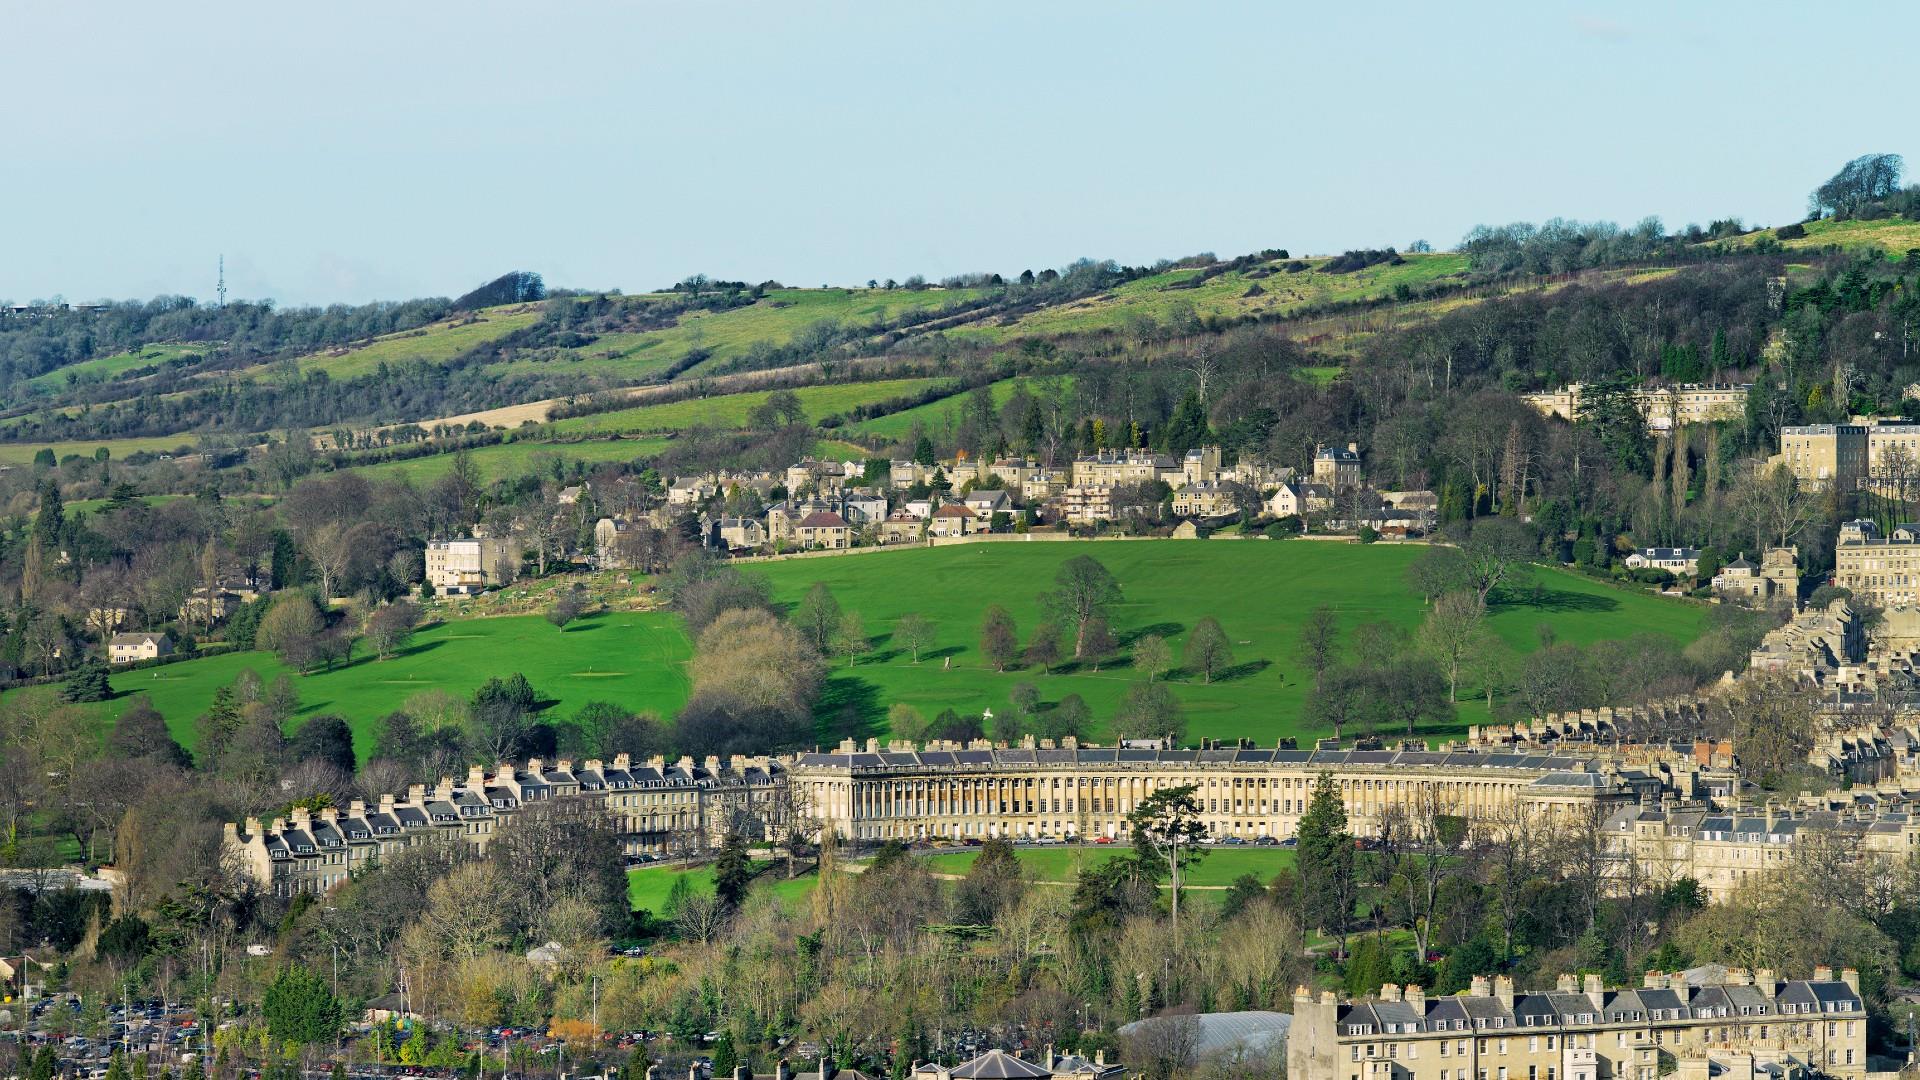 Royal Crescent and surrounding countryside